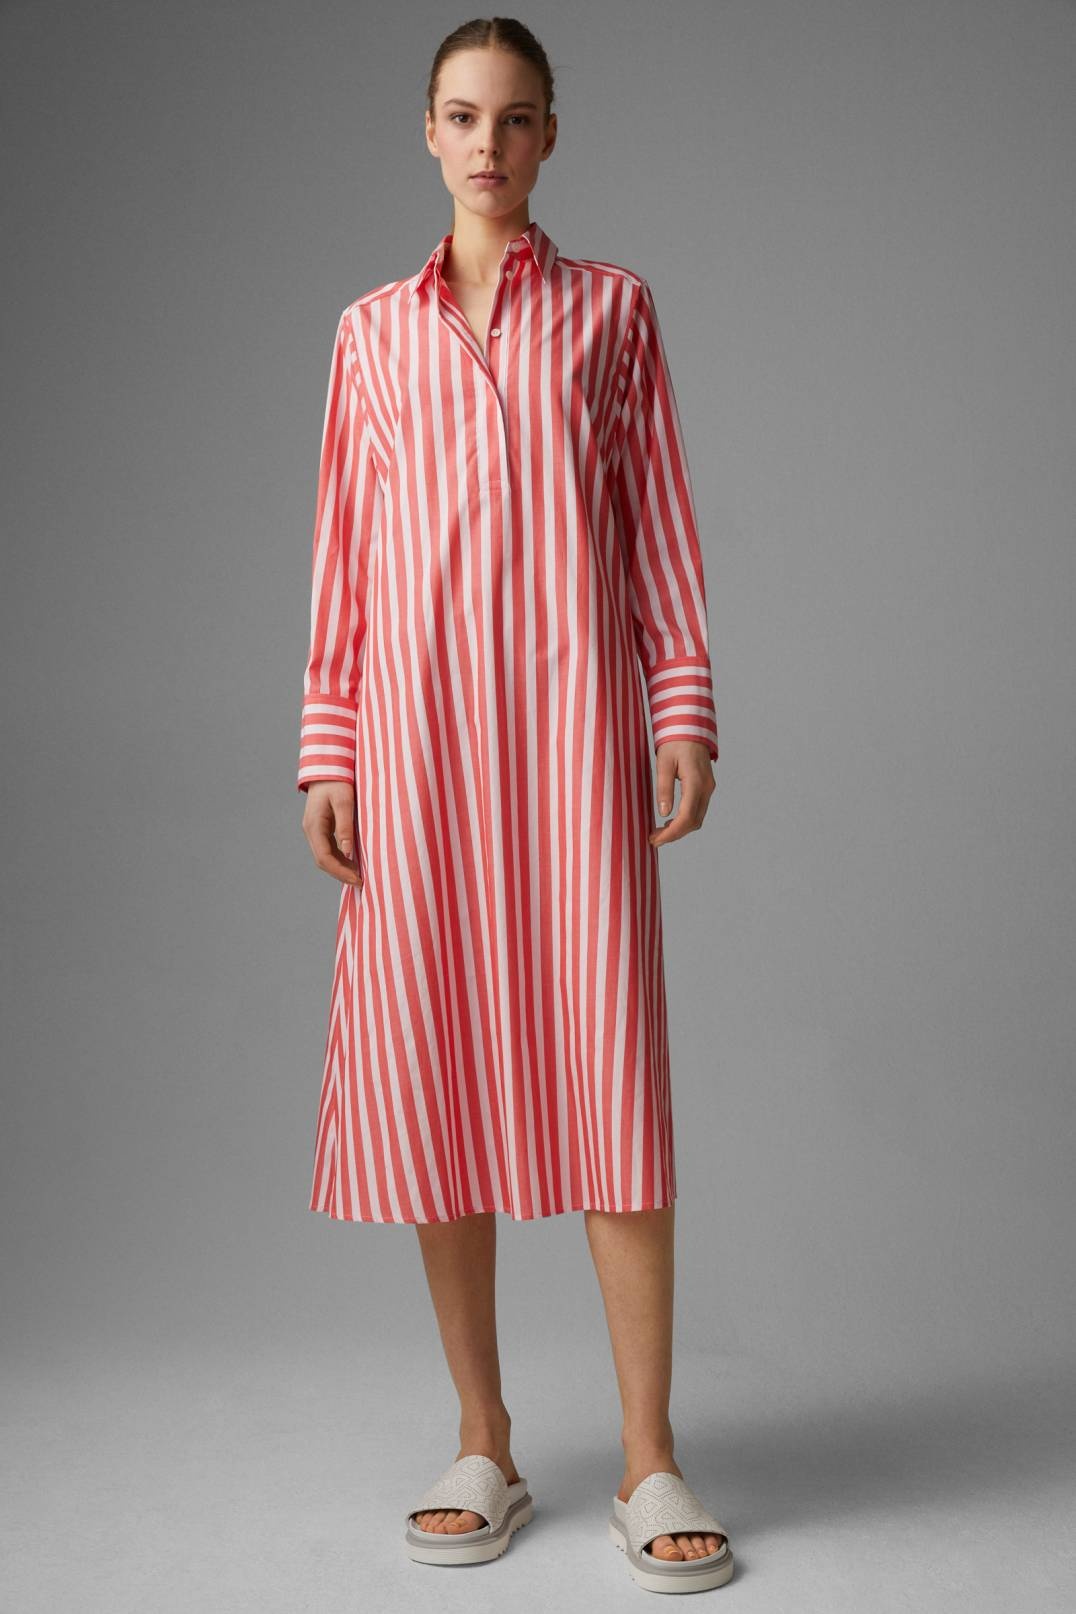 LIA SHIRT DRESS IN RED/OFF-WHITE - 2